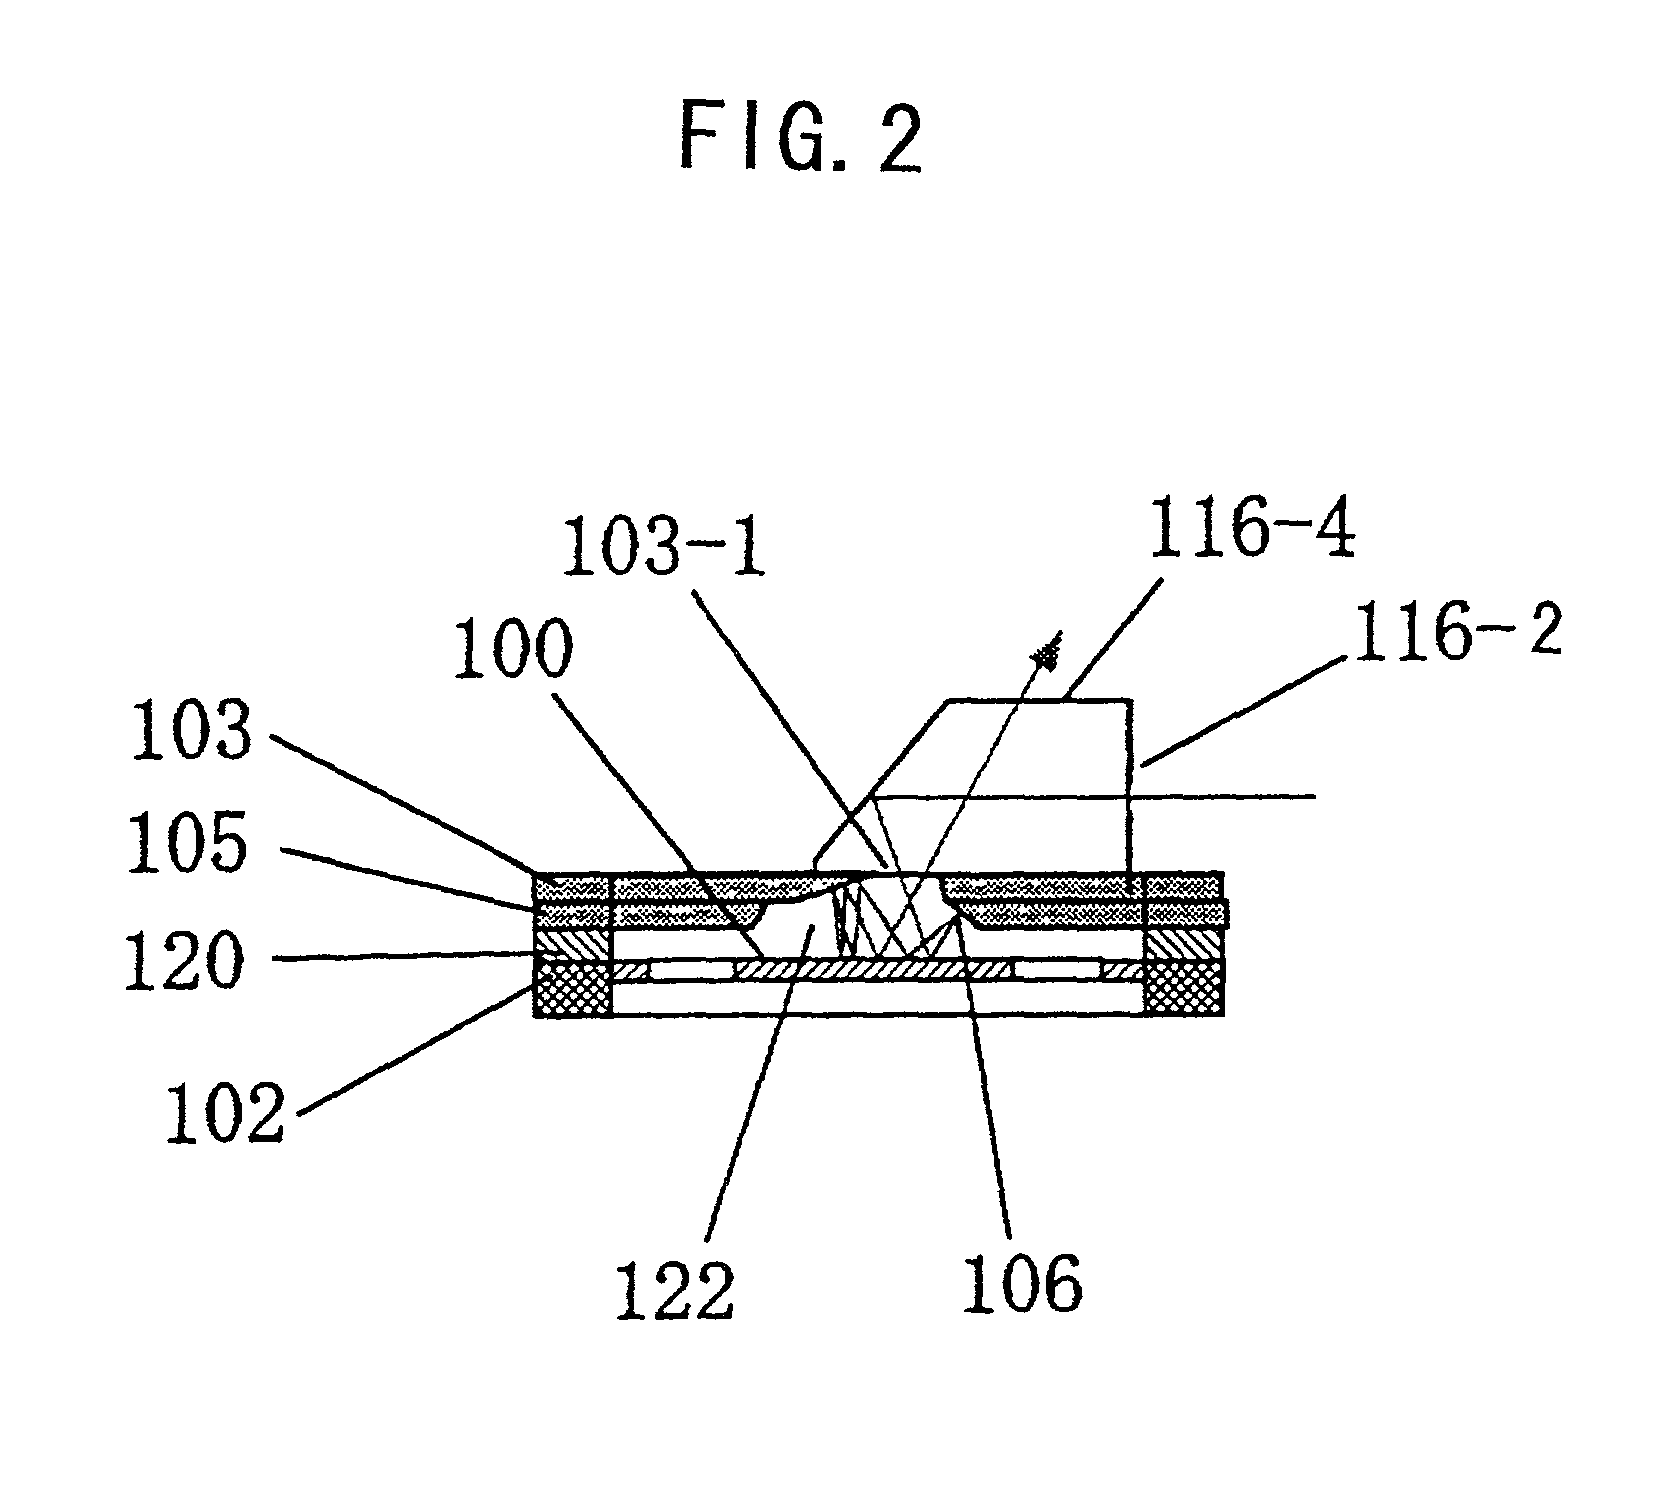 Optical scanning module, device, and method, and imaging apparatus